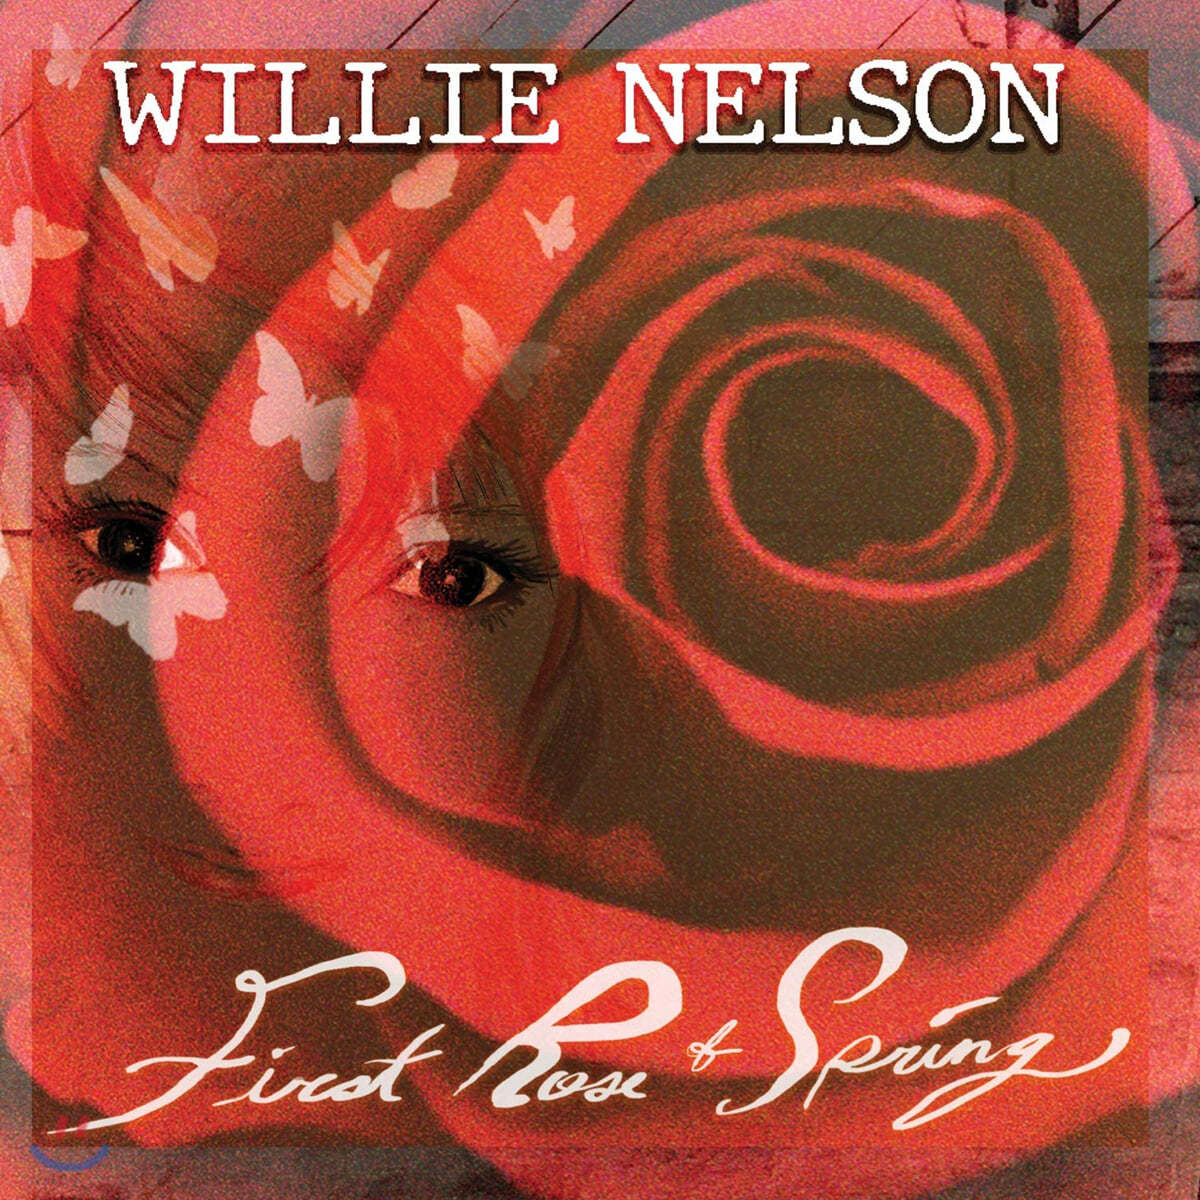 Willie Nelson (윌리 넬슨) - First Rose Of Spring